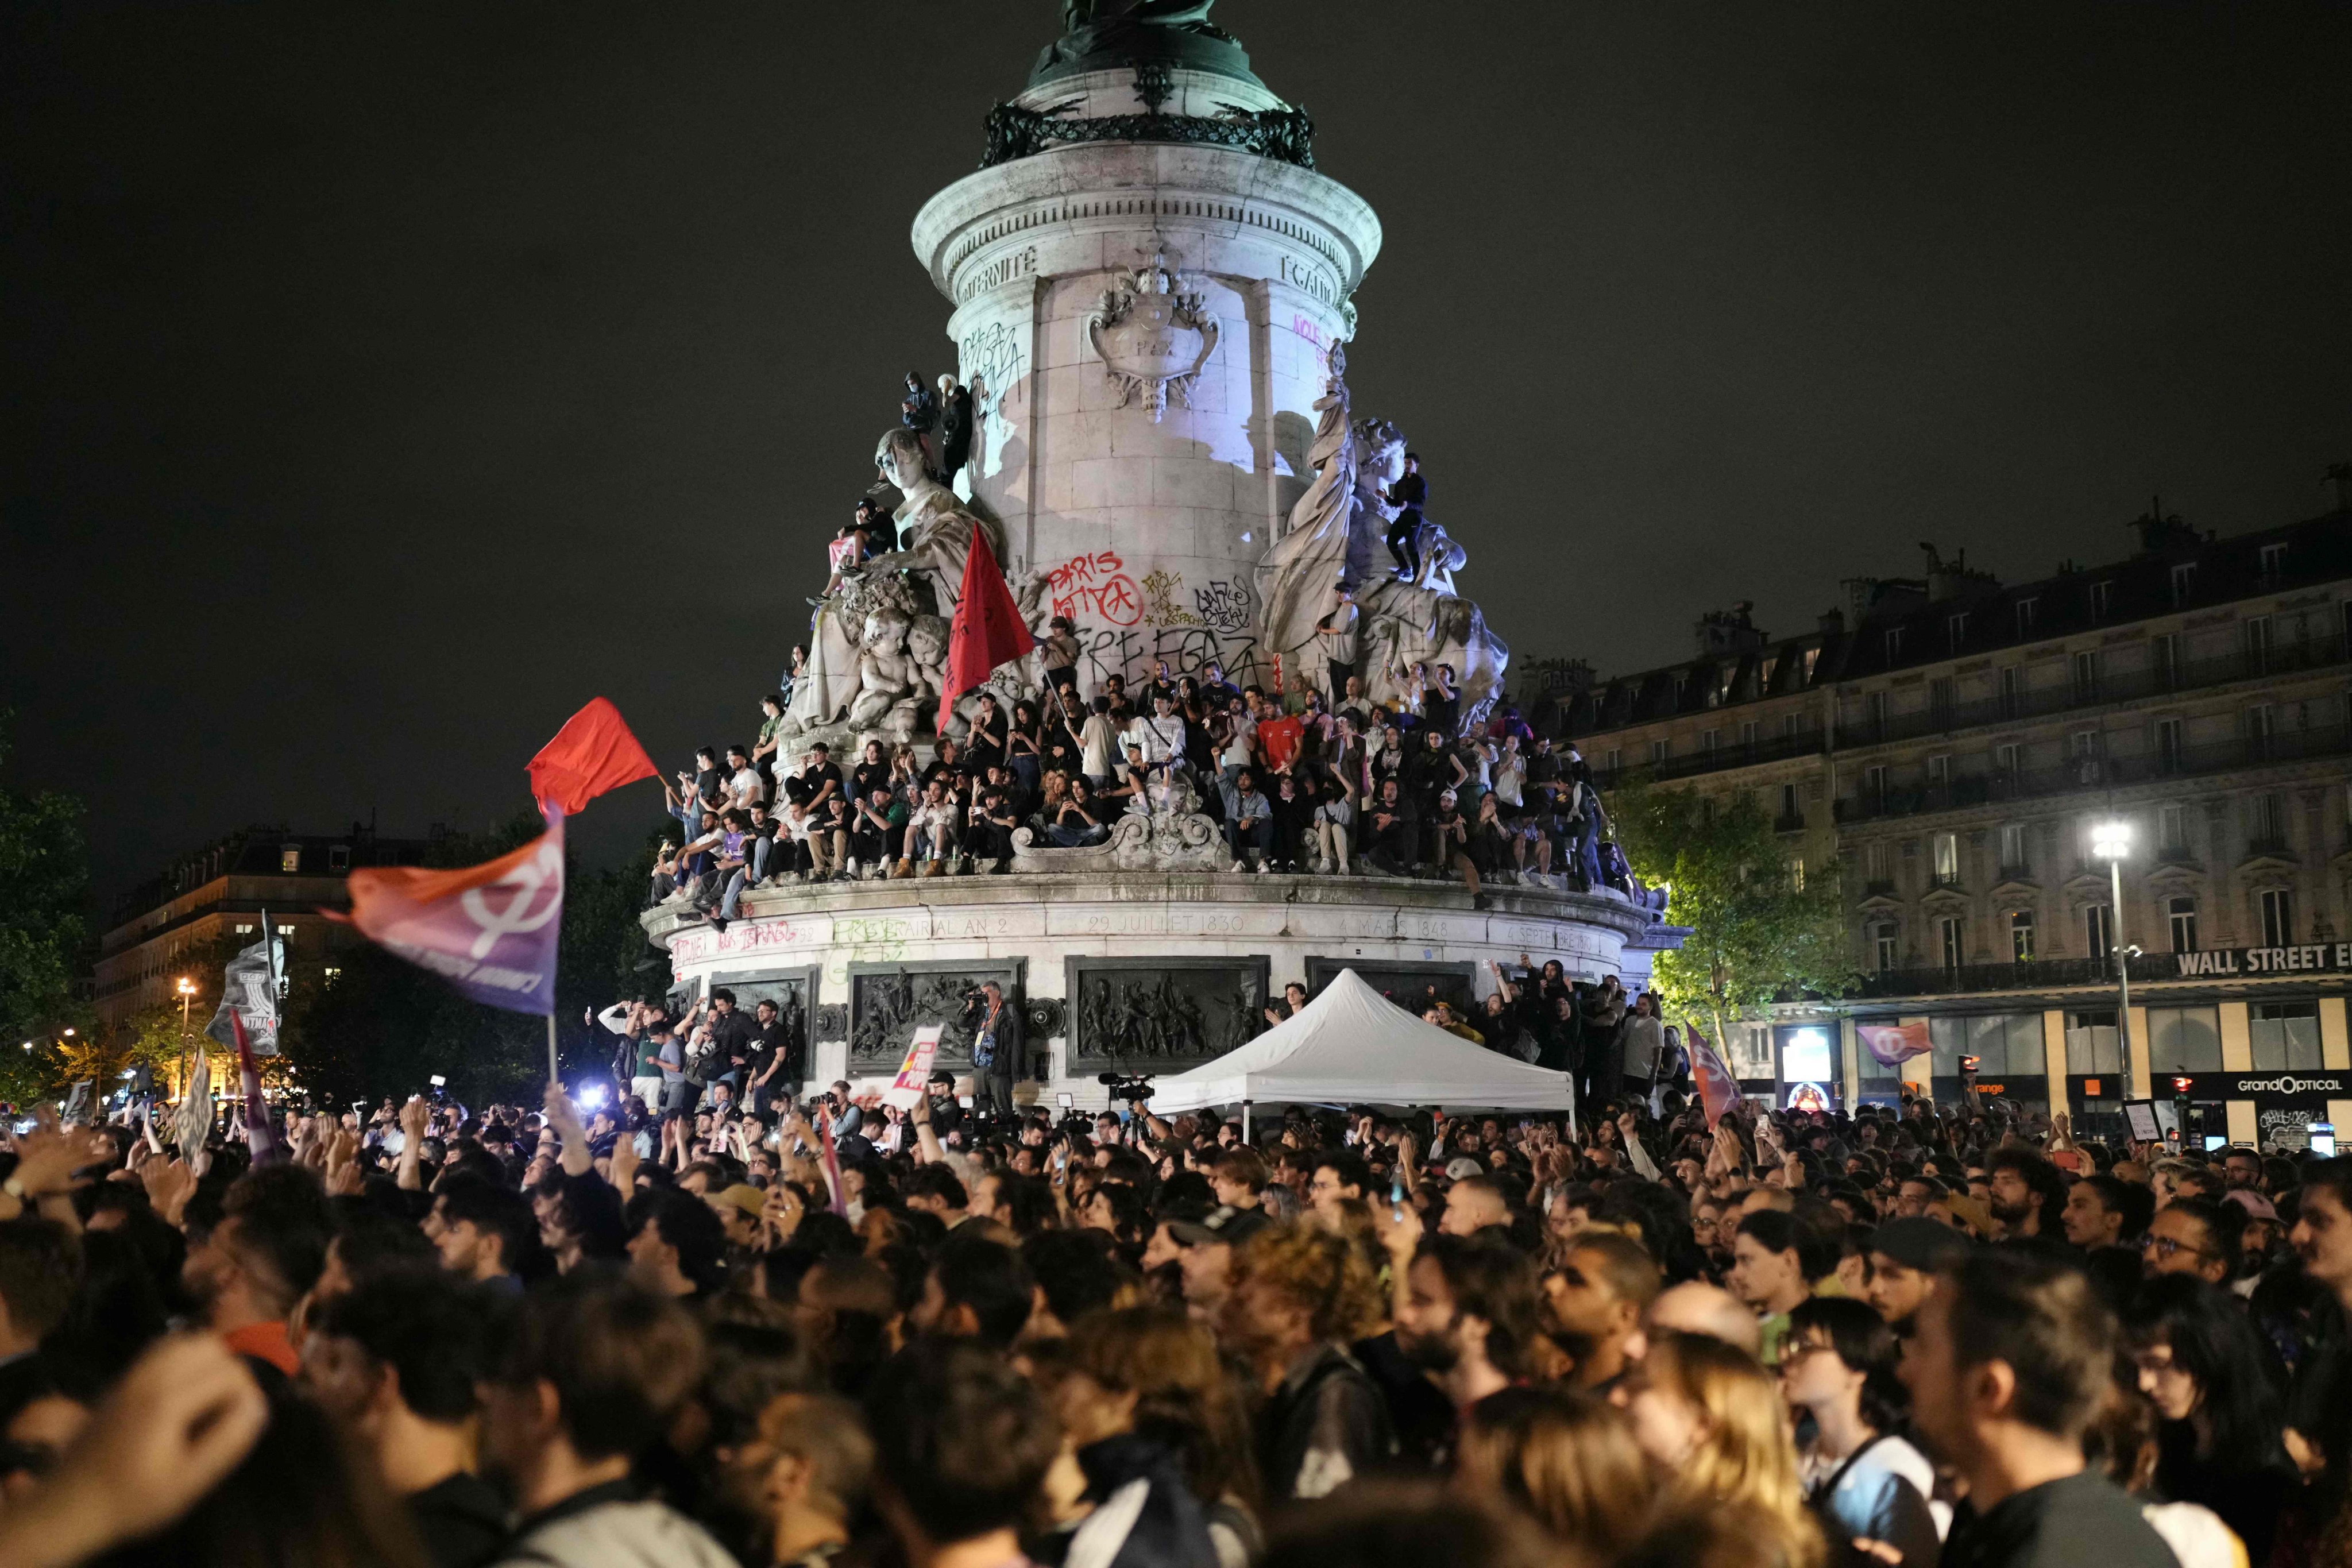 Demonstrators rally against the far-right after France announced first-round election results, at Place de la Republique in Paris on June 30. The election has left France politically divided. Photo: AFP